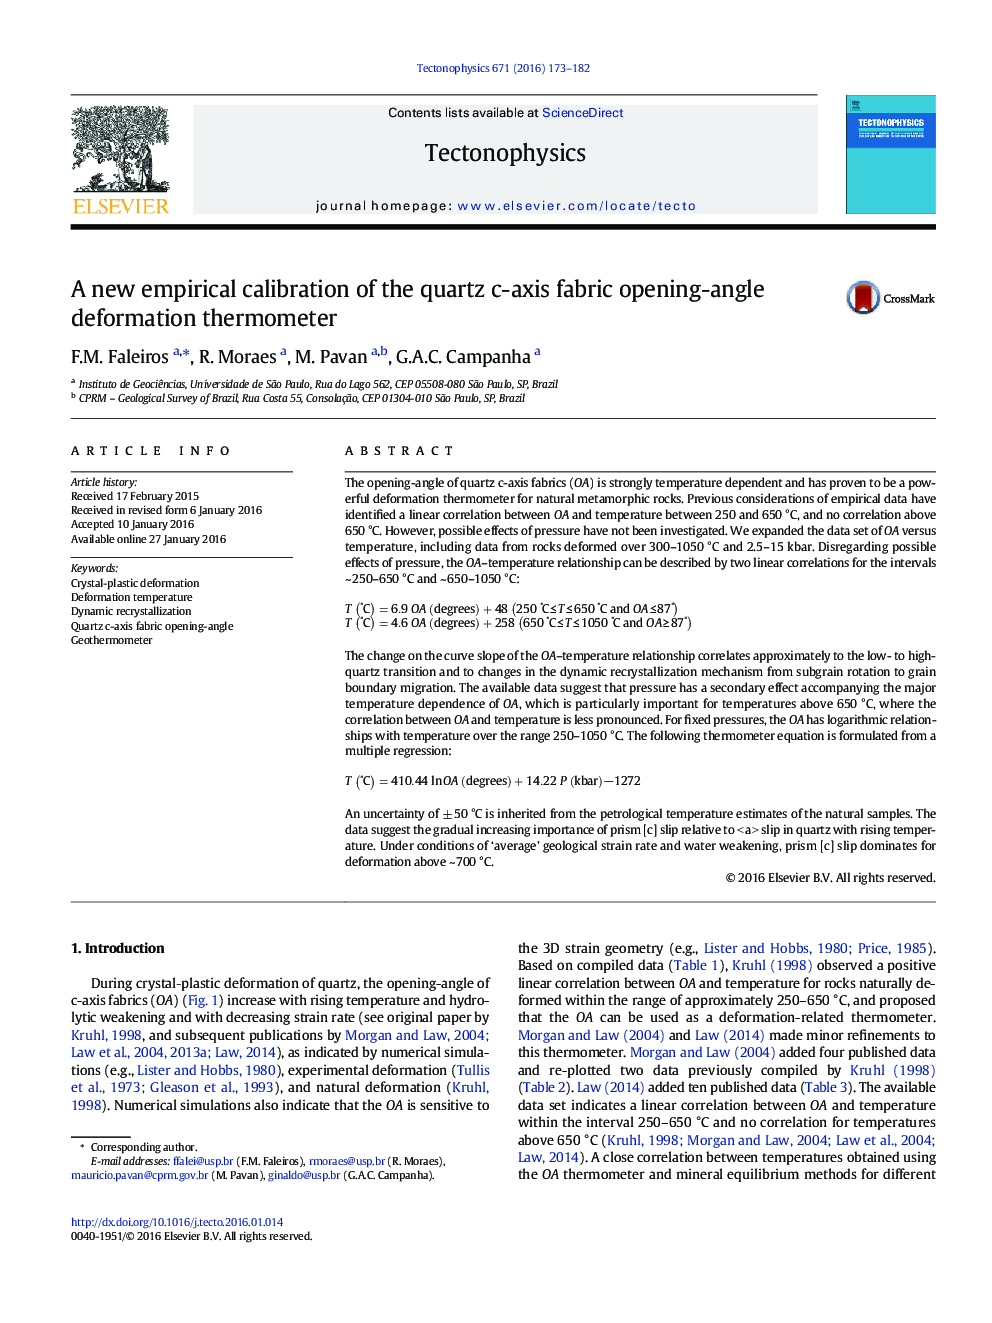 A new empirical calibration of the quartz c-axis fabric opening-angle deformation thermometer